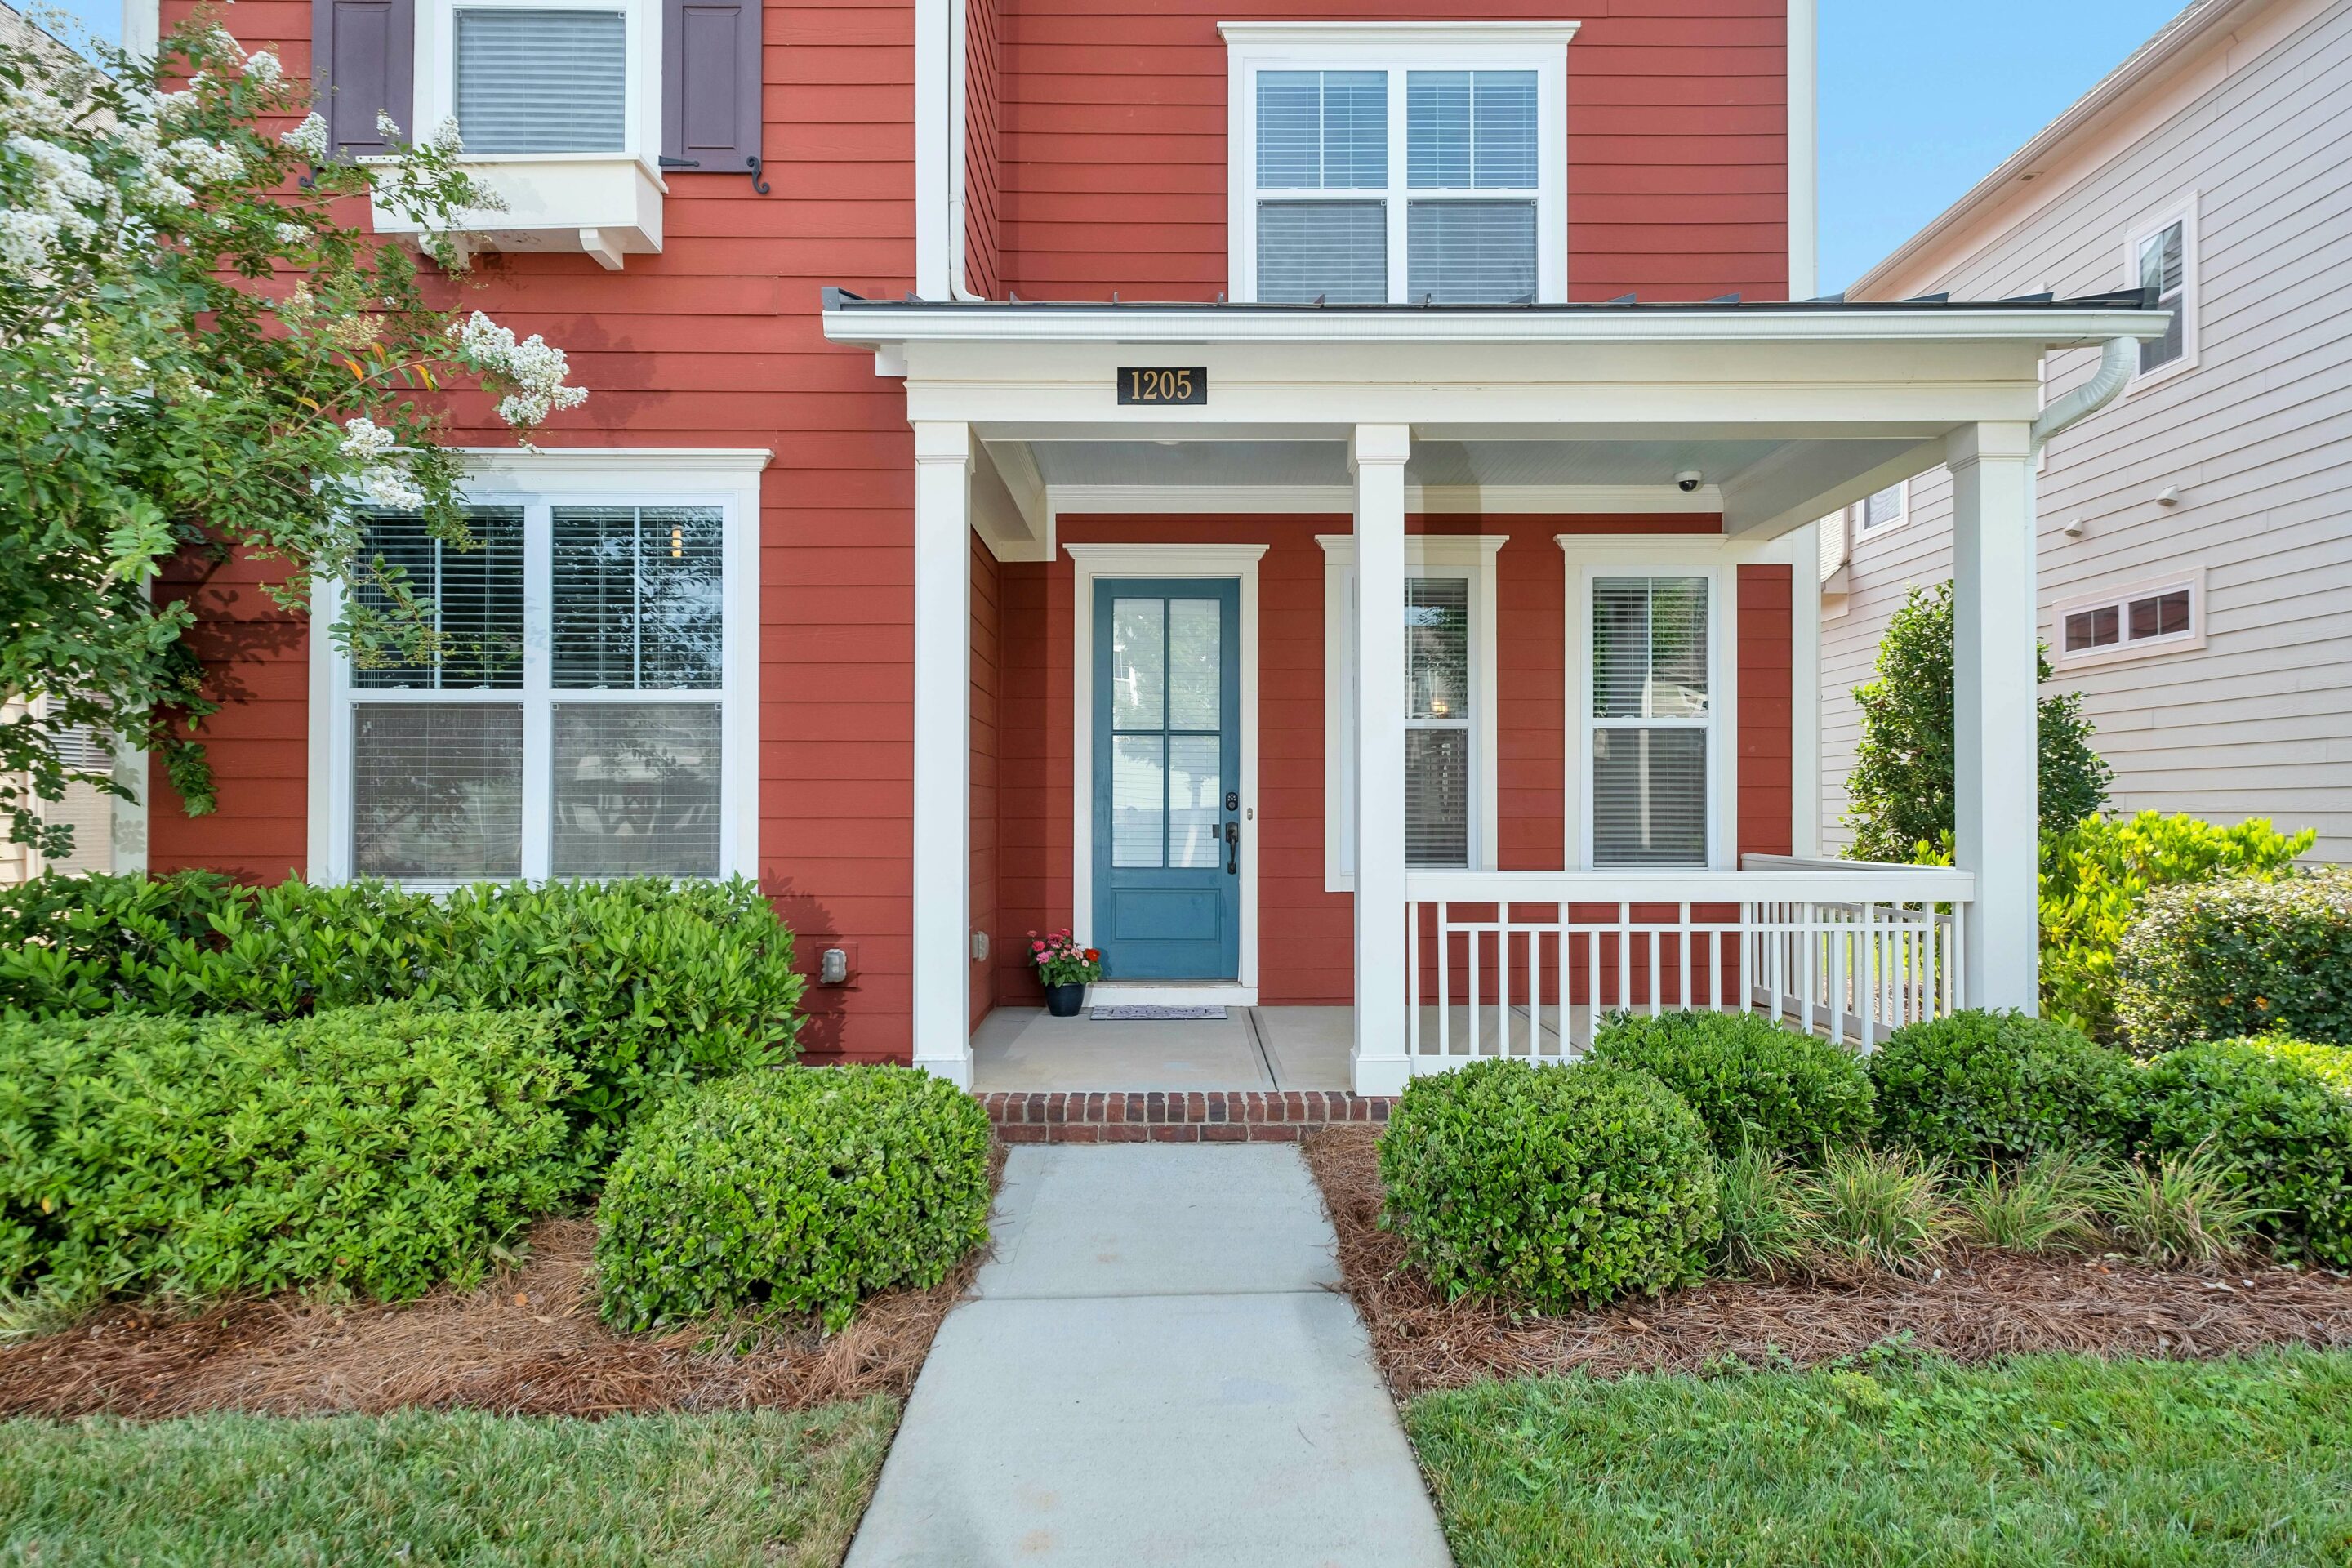 A charming red house with white trim and a welcoming front porch